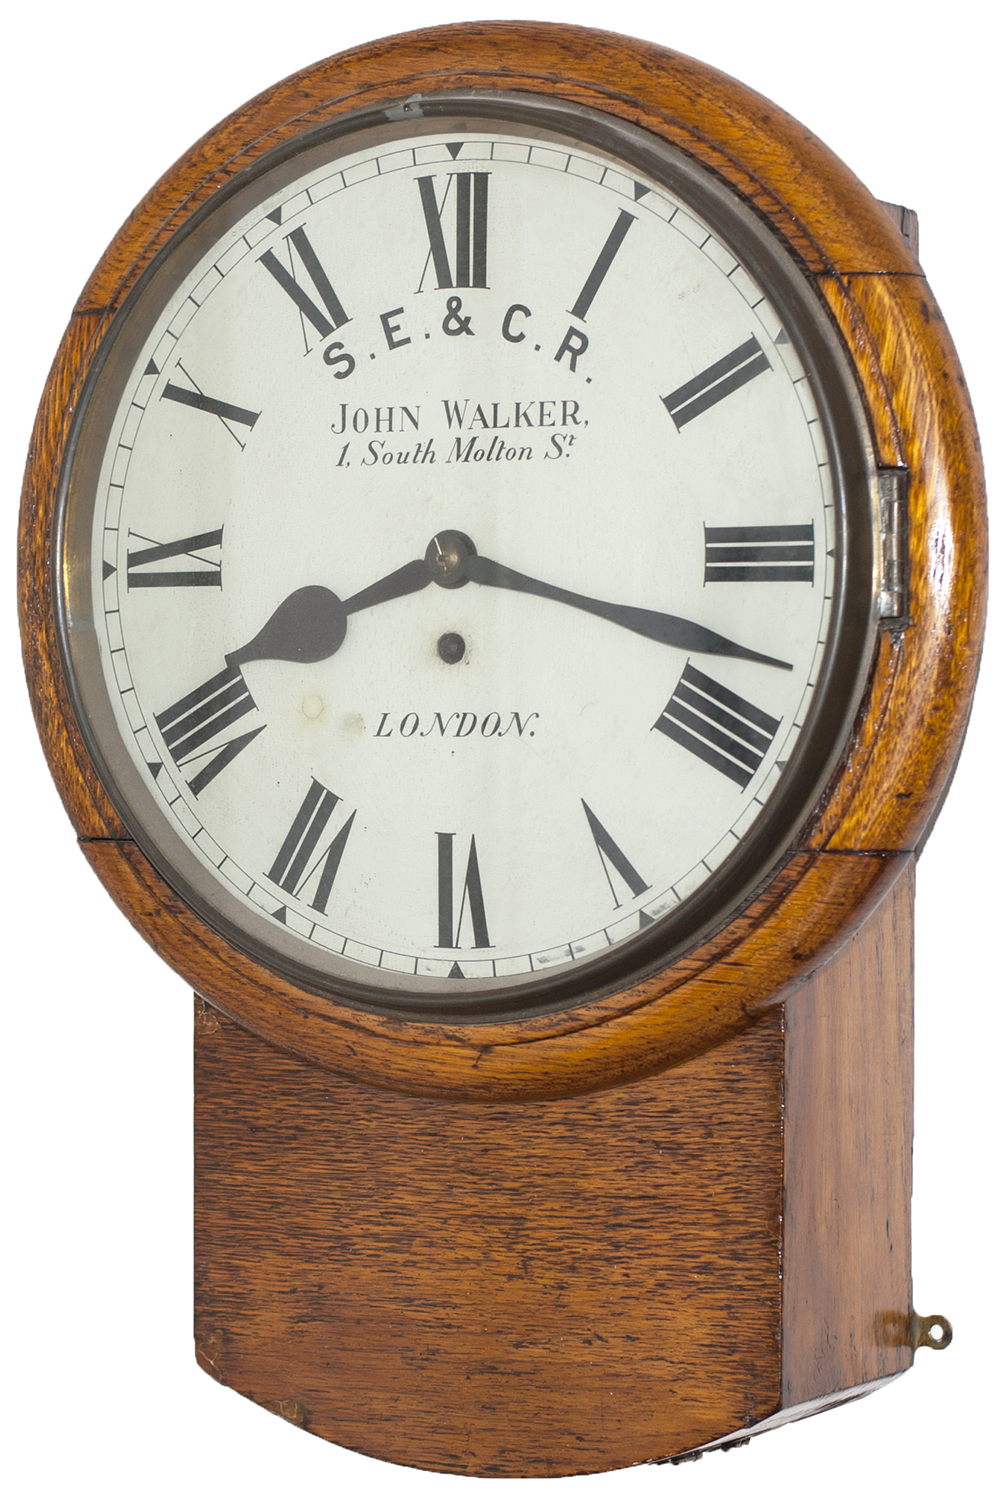 South Eastern & Chatham Railway 12in dial oak cased drop dial railway clock with a chain driven